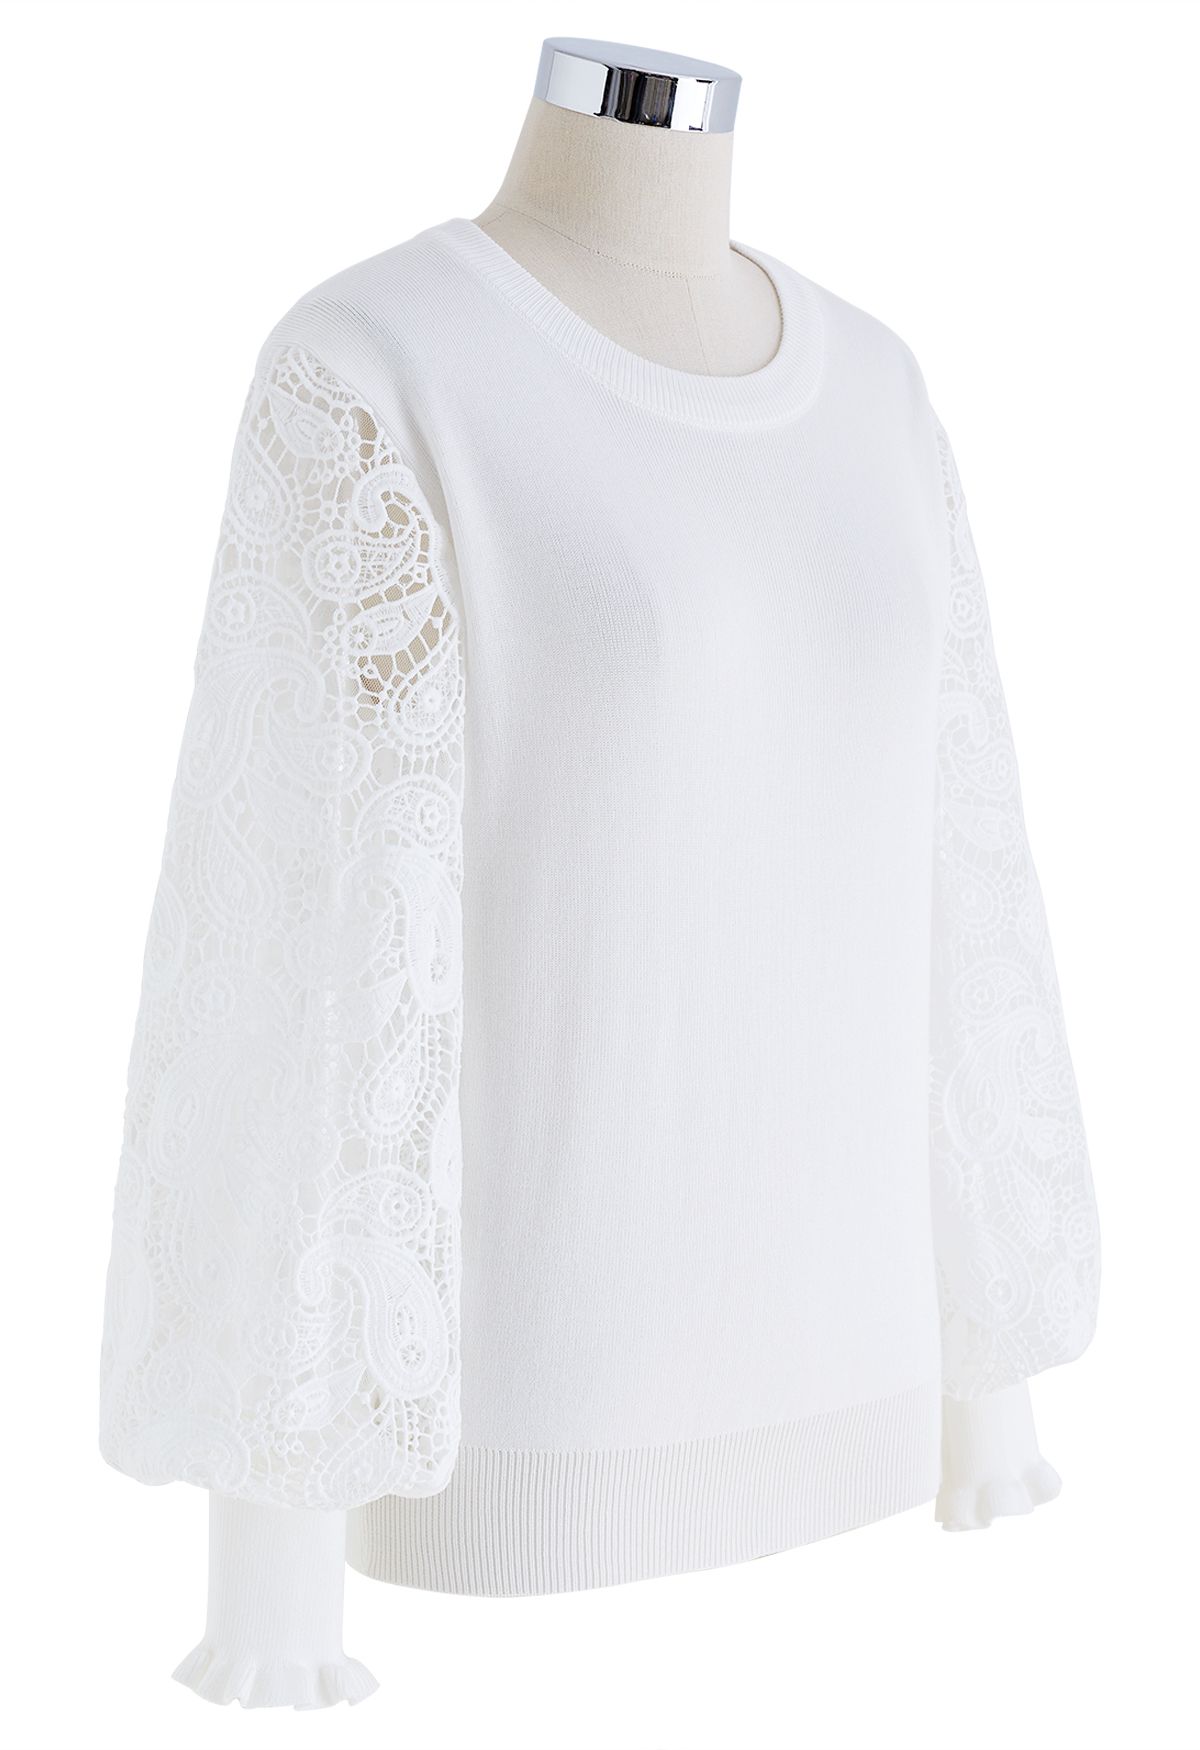 Paisley Crochet Sleeve Knit Top in White